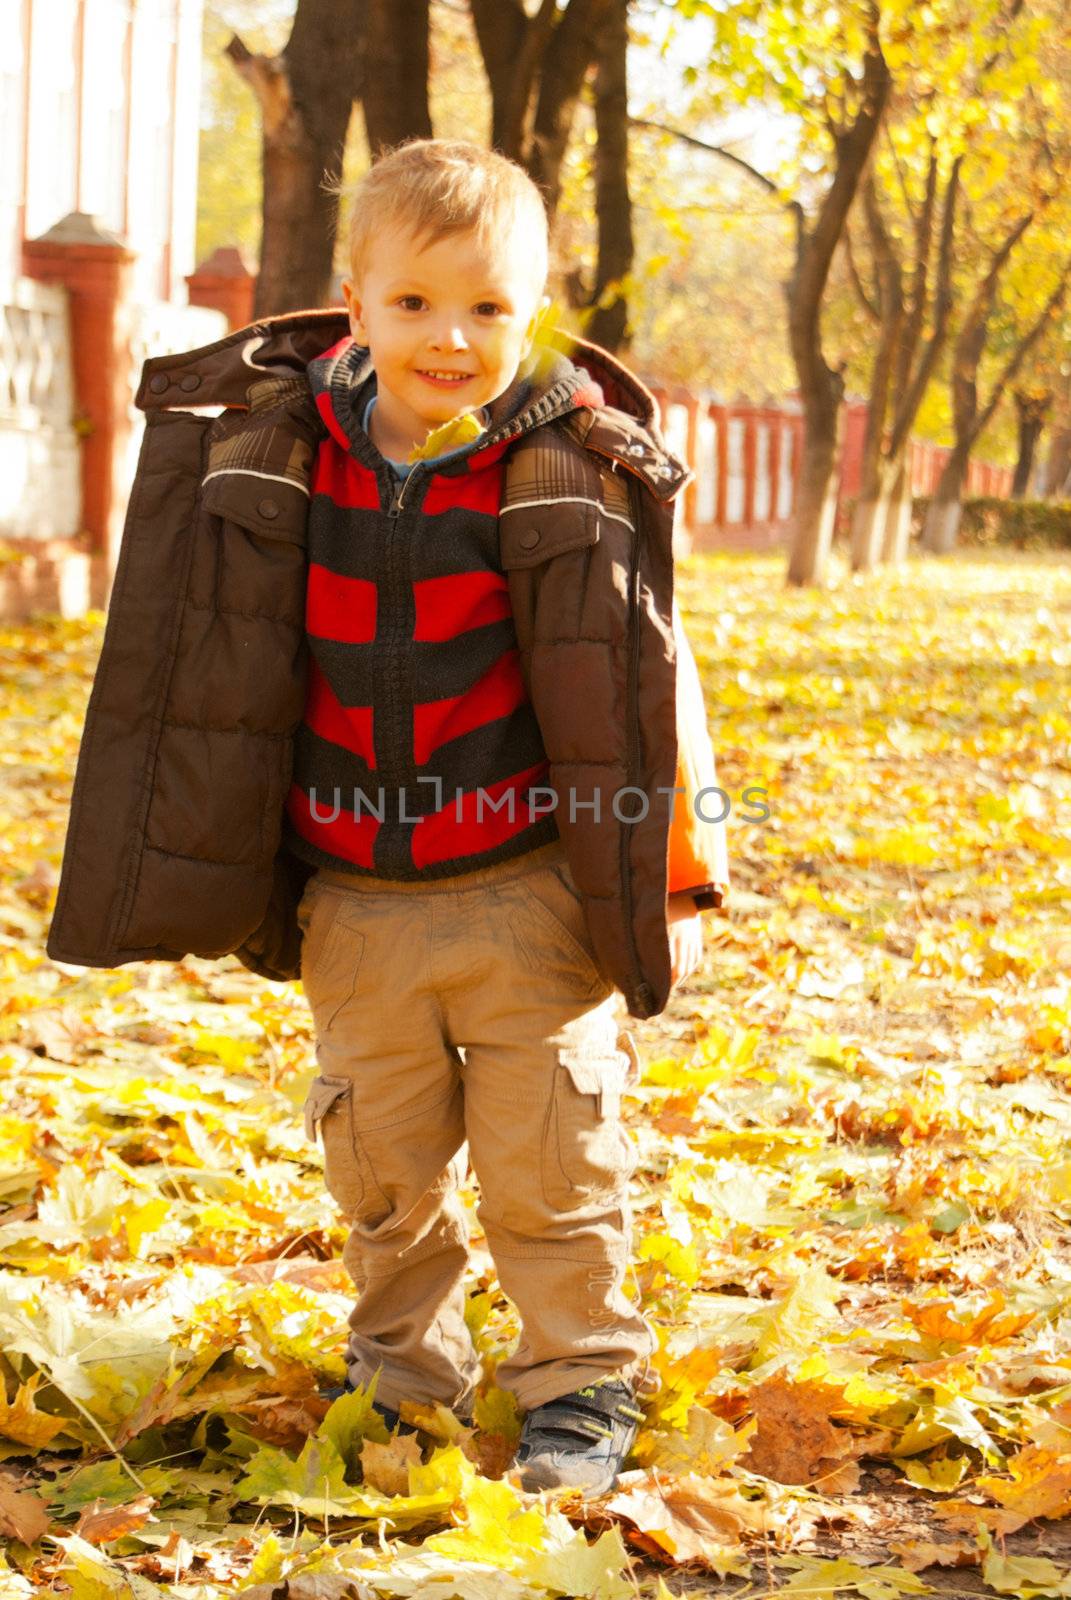 Boy playing with leaves at fall time